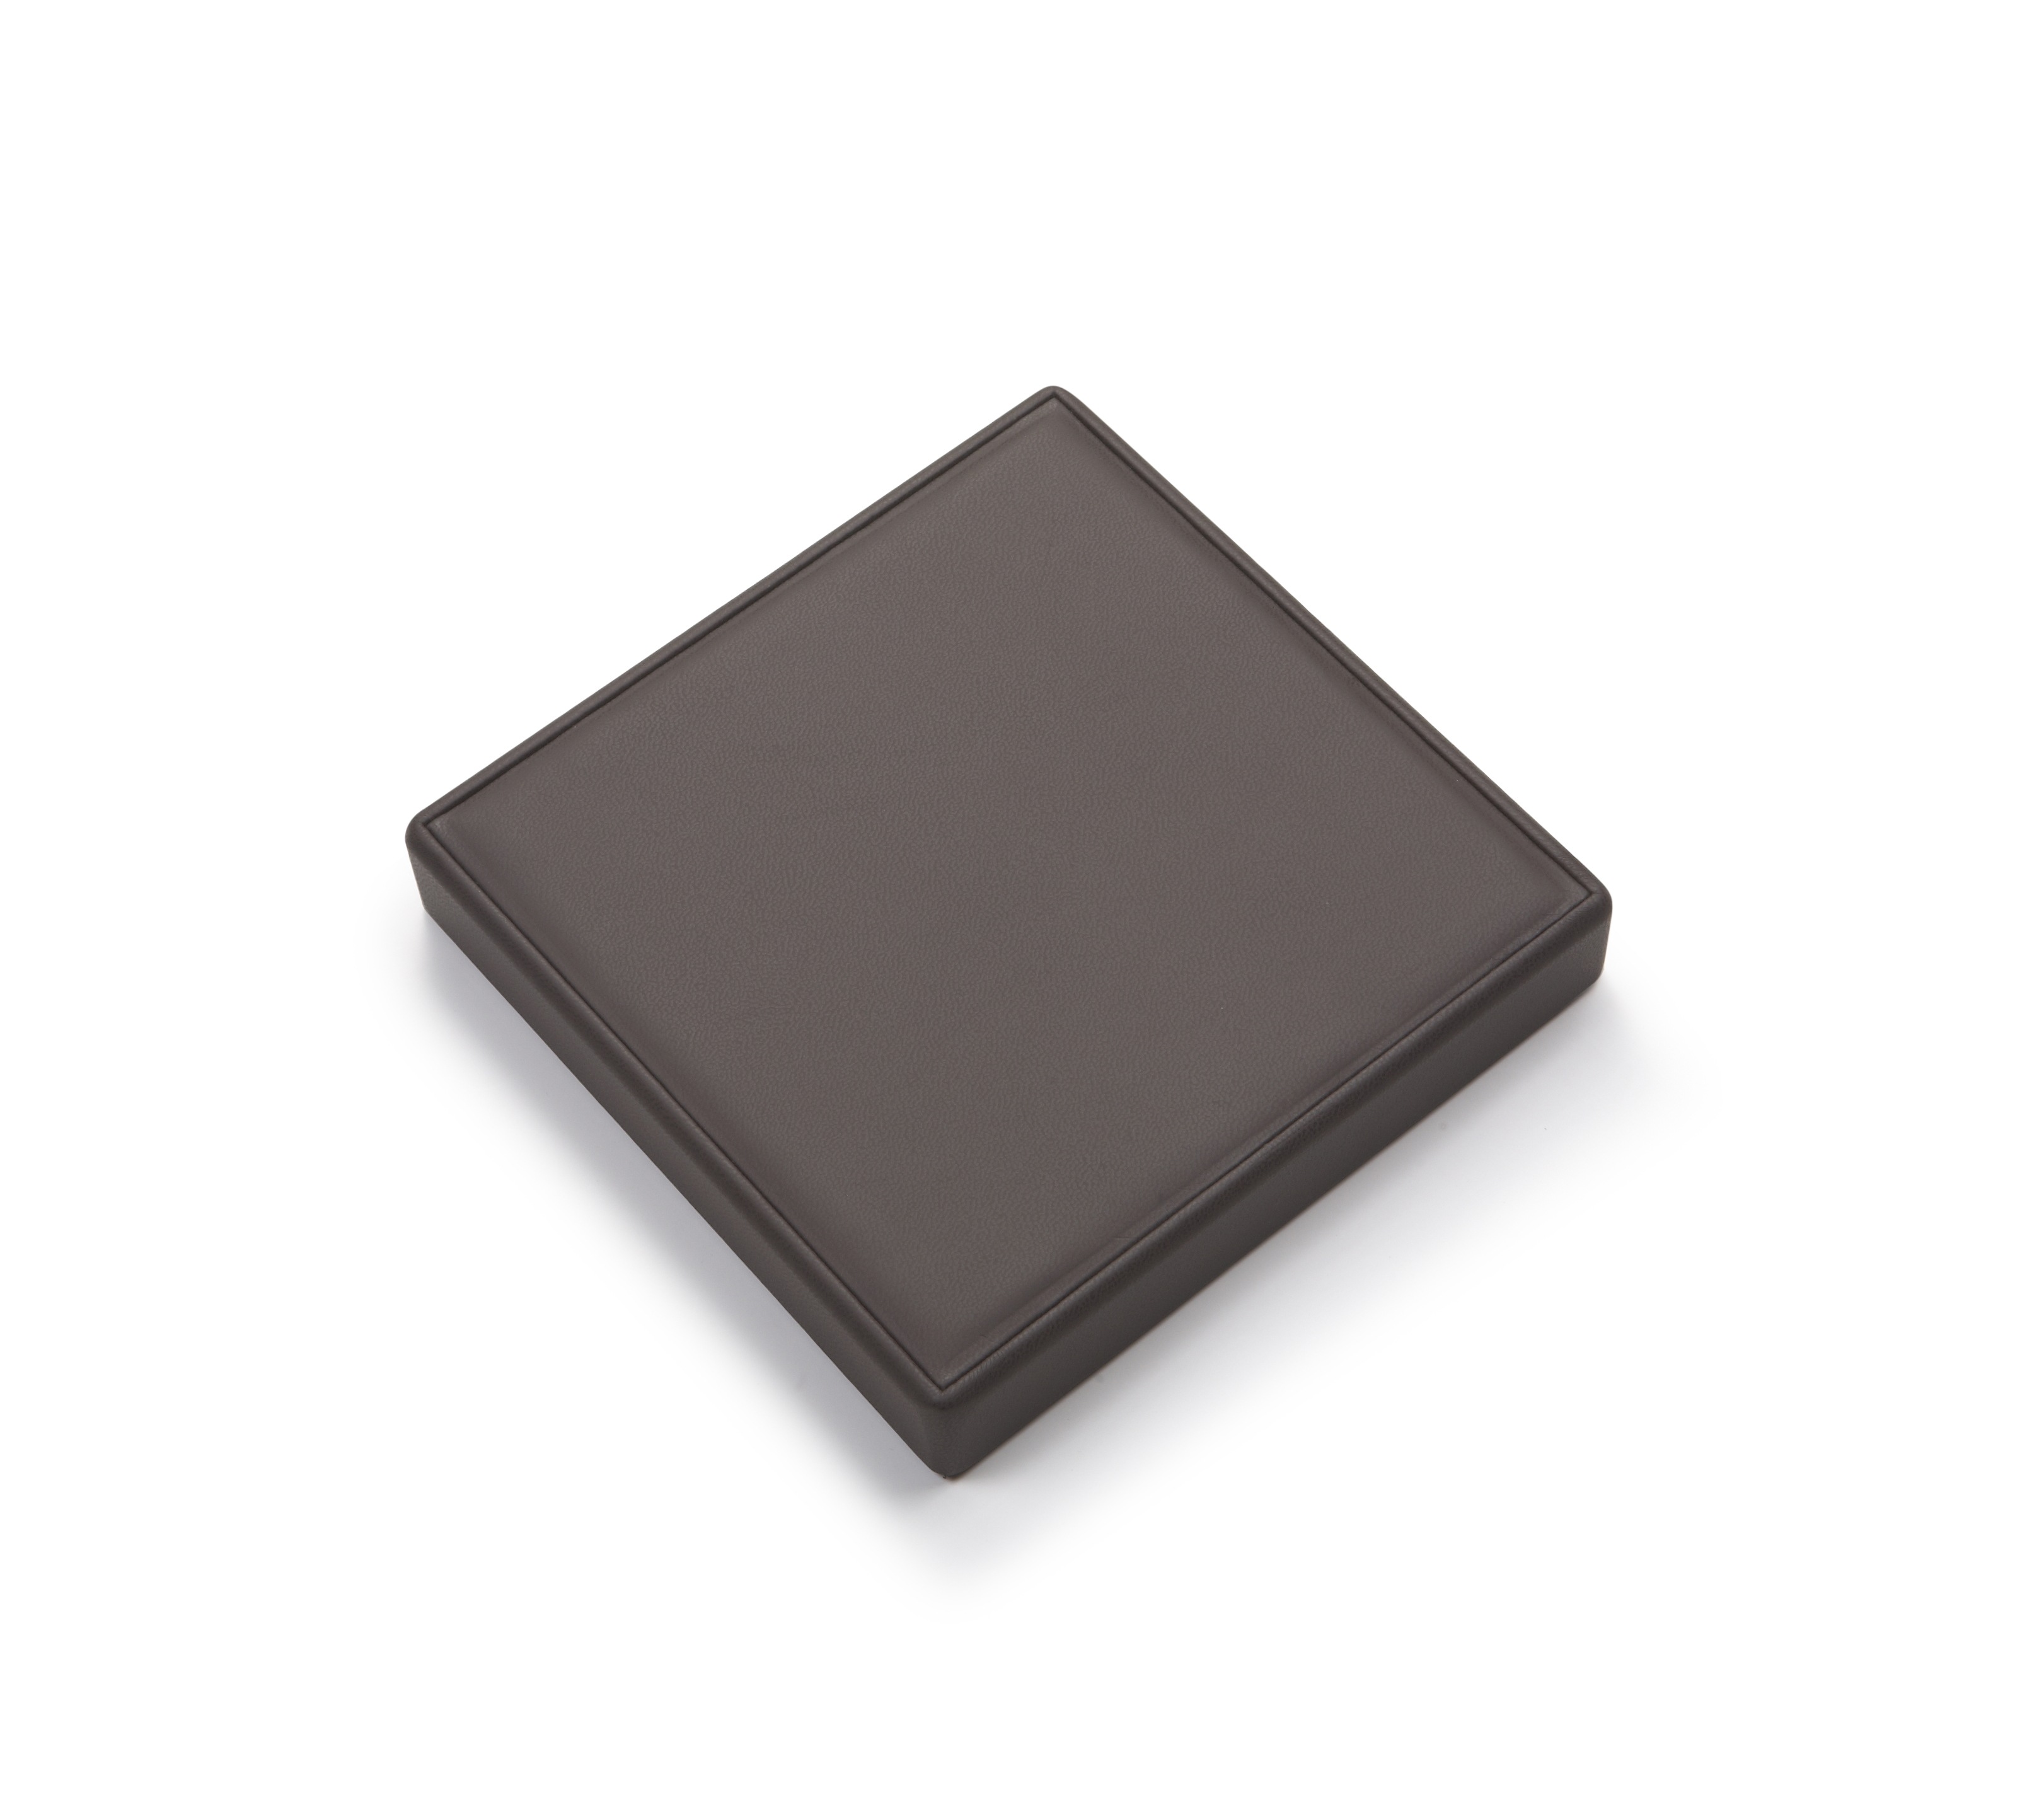 Chocolate/Beige Leatherette Tray Cover